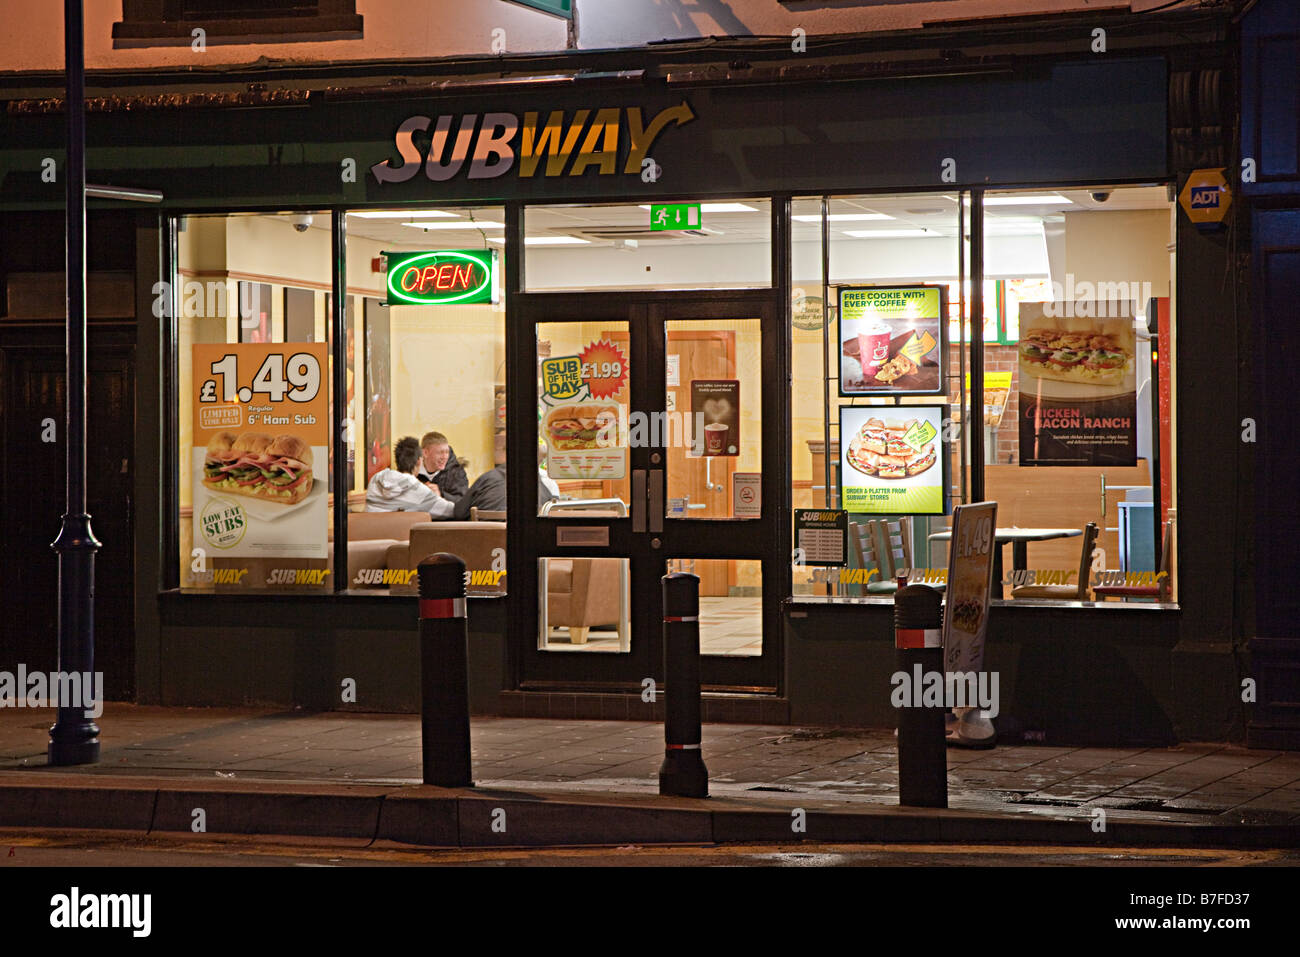 Youths in Subway fast food cafe at night Abergavenny Wales UK Stock Photo